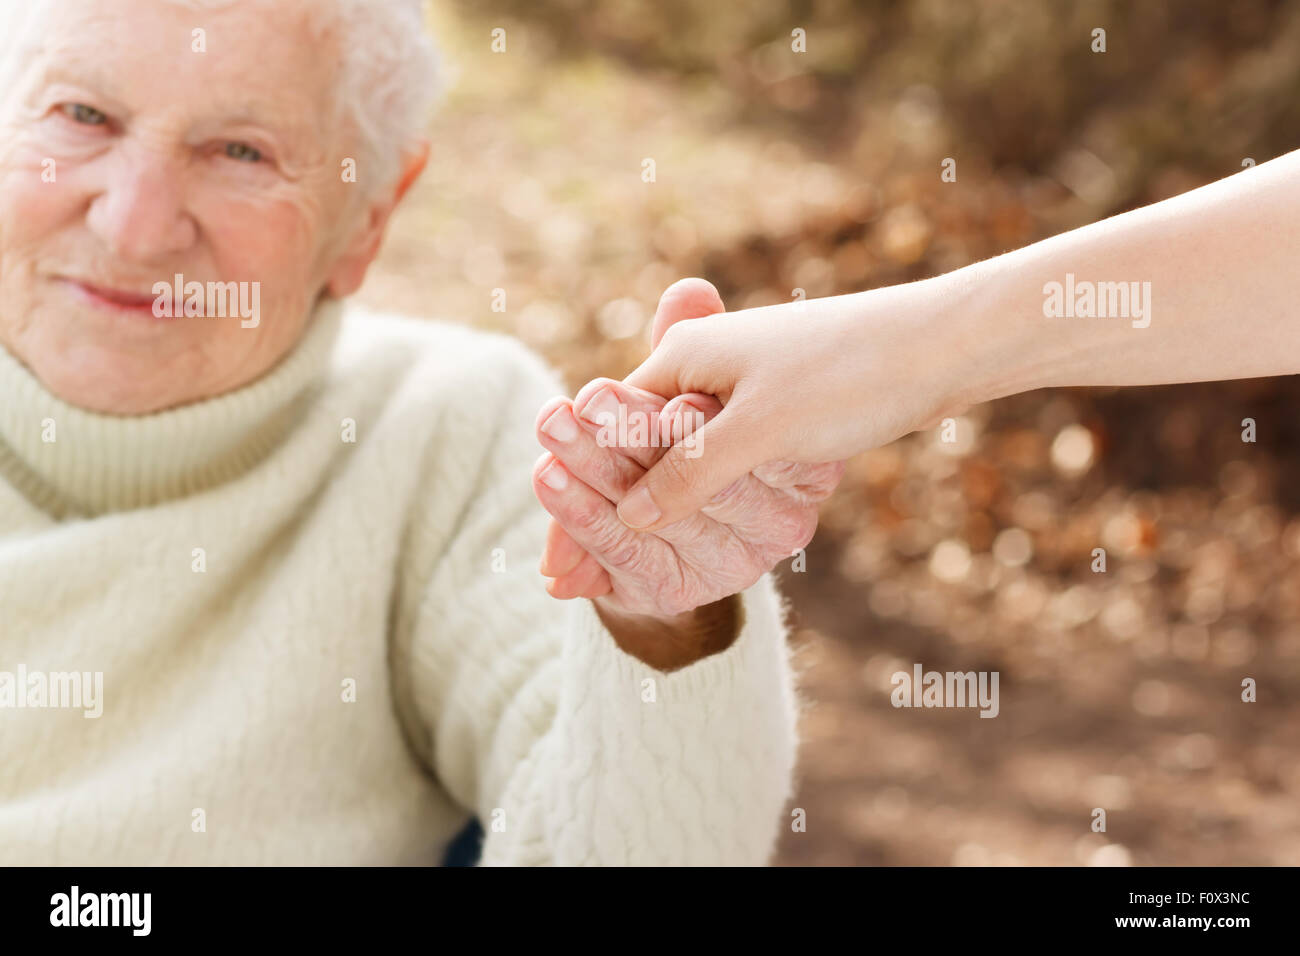 Elderly woman holding hands with young woman outside Stock Photo